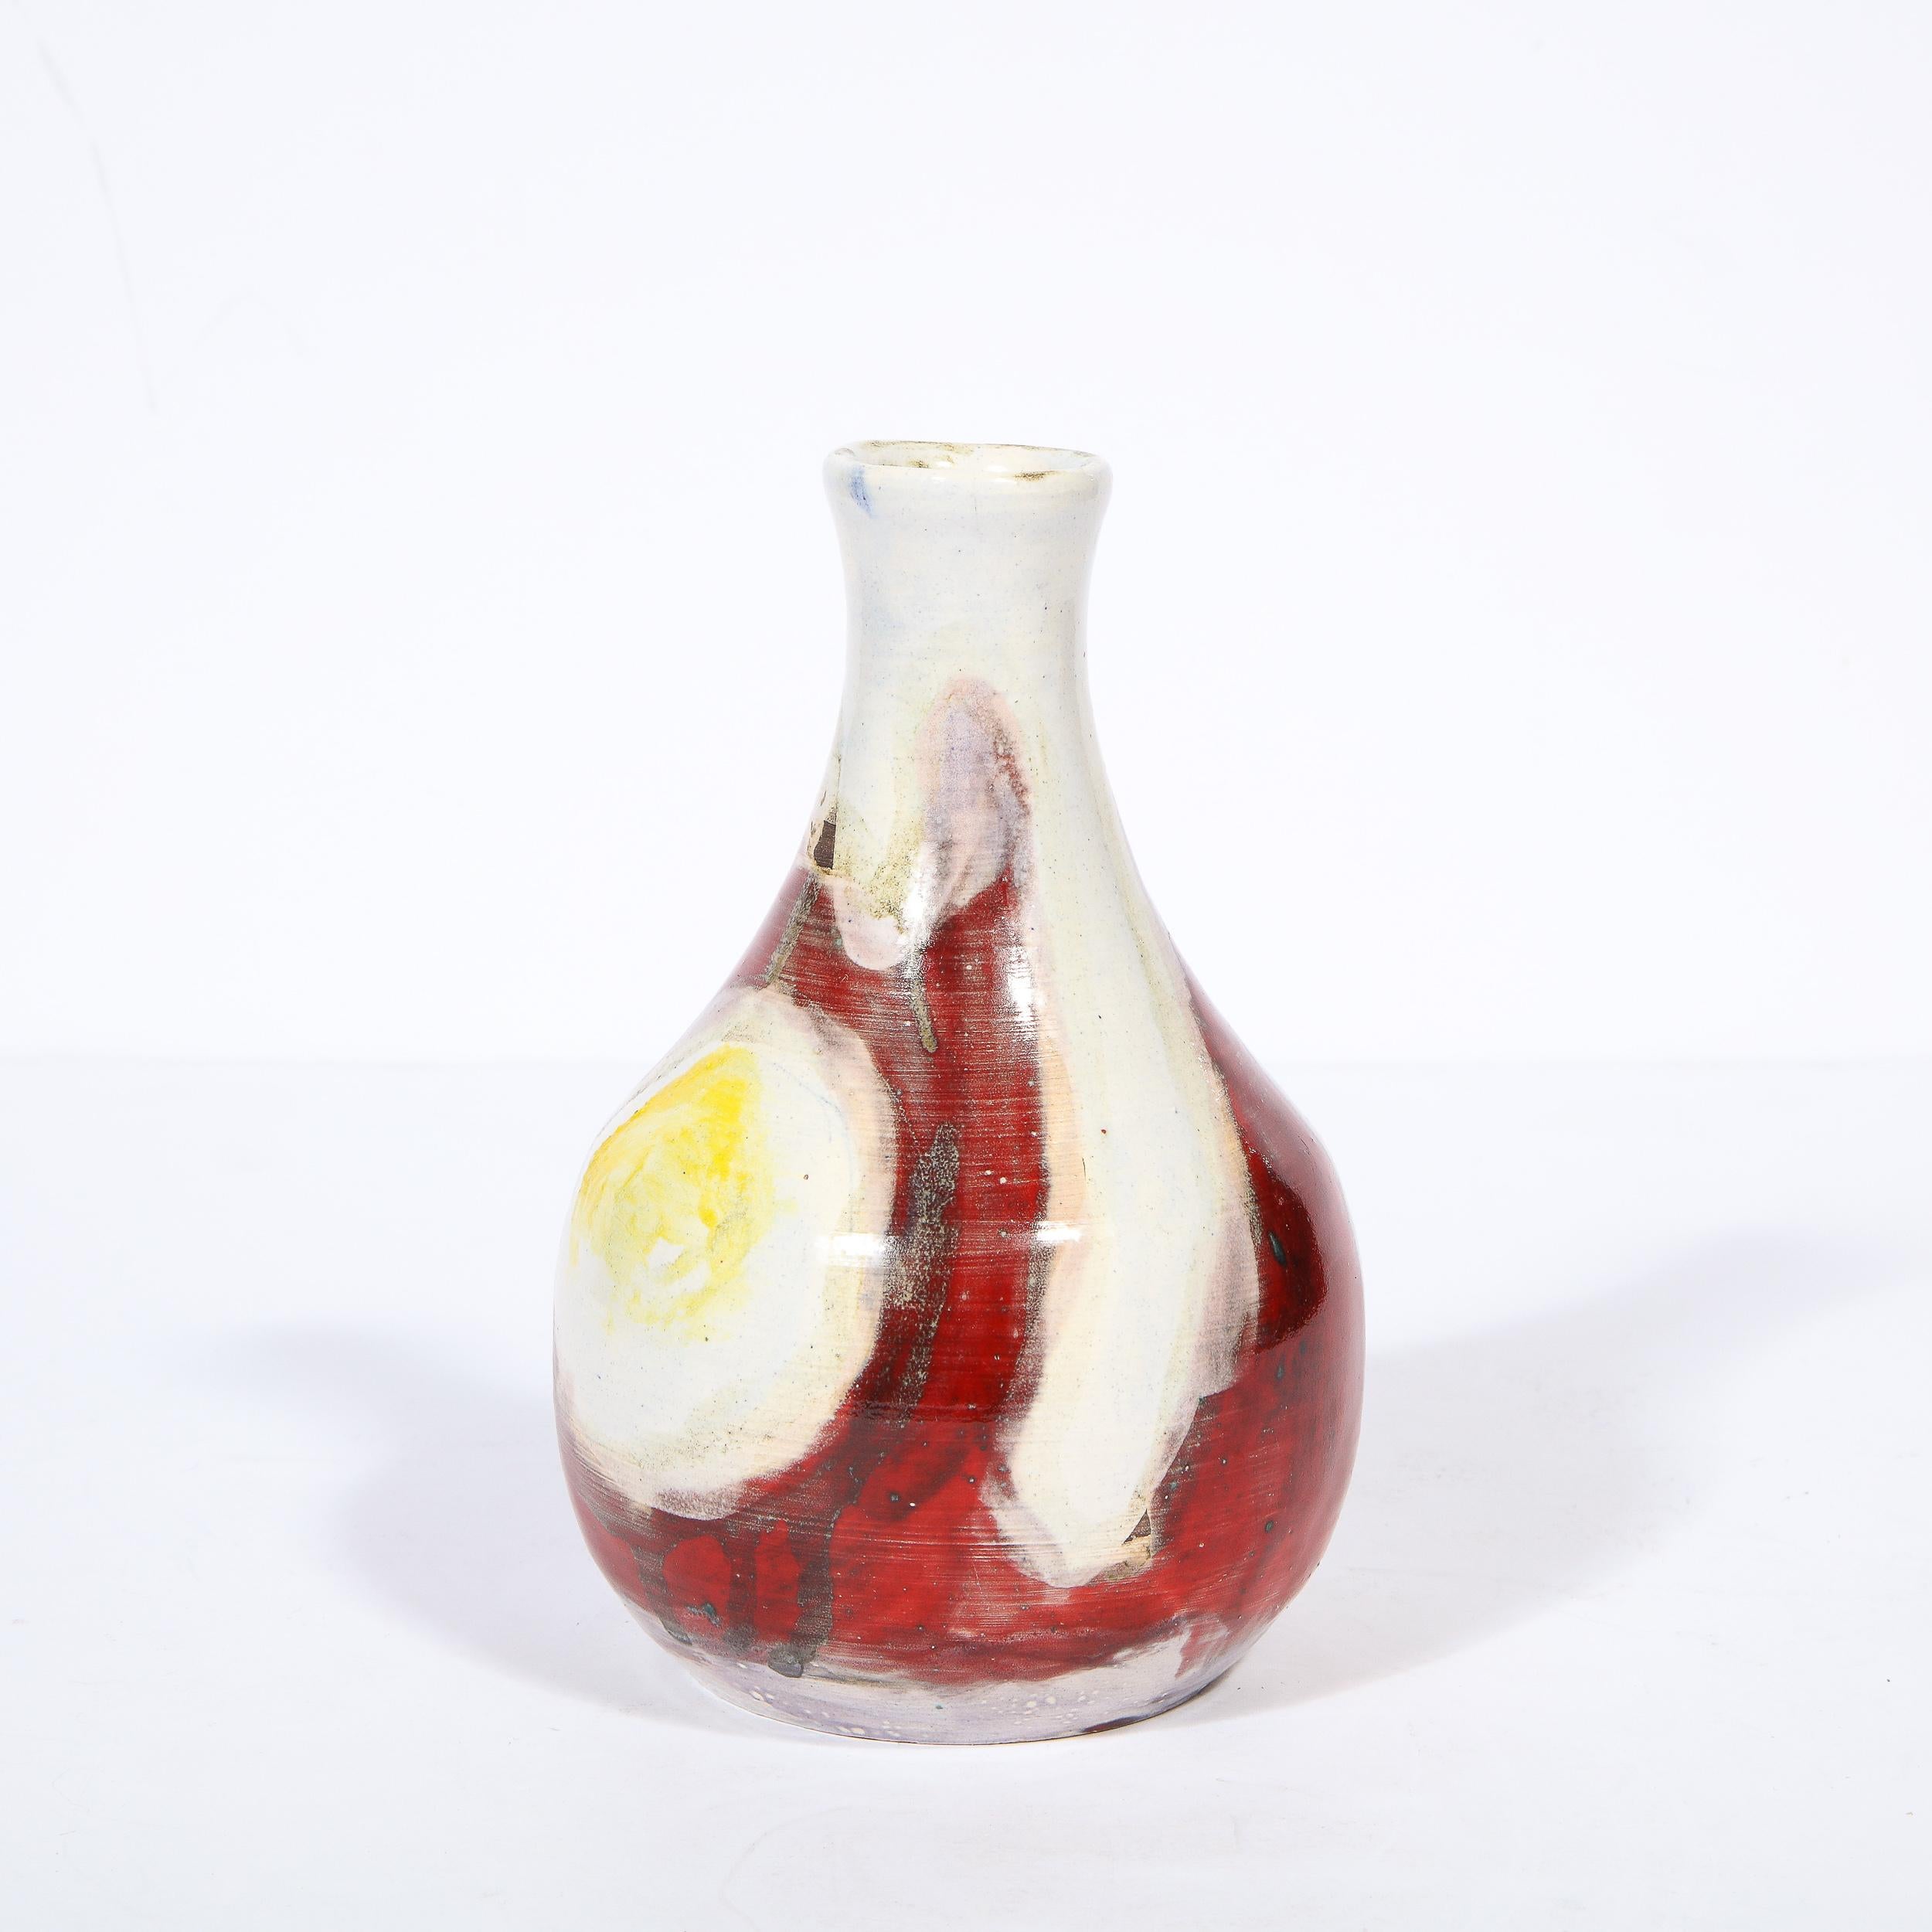 This stunning Mid Century Modern ceramic vase was realized by the esteemed artist Jean Mégard in France in 1953. It features a teardrop form with a bulbous base that tapers to an elongated neck. The handcrafted ceramic offers an expressionistic